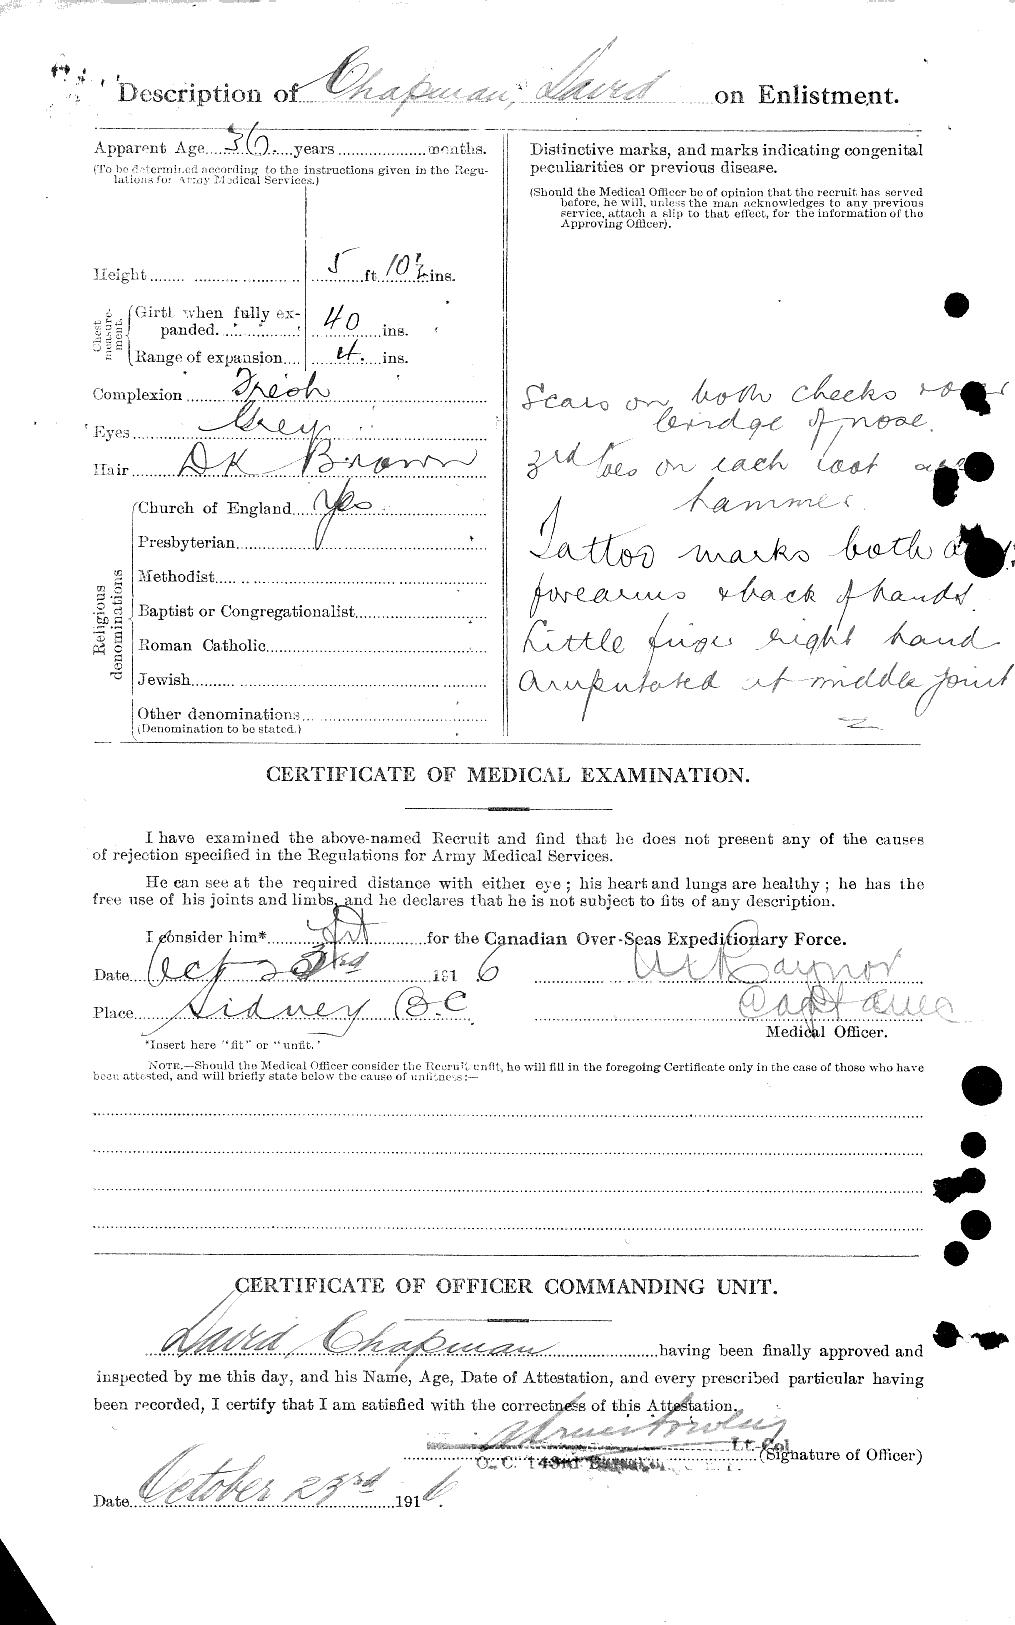 Personnel Records of the First World War - CEF 013923b